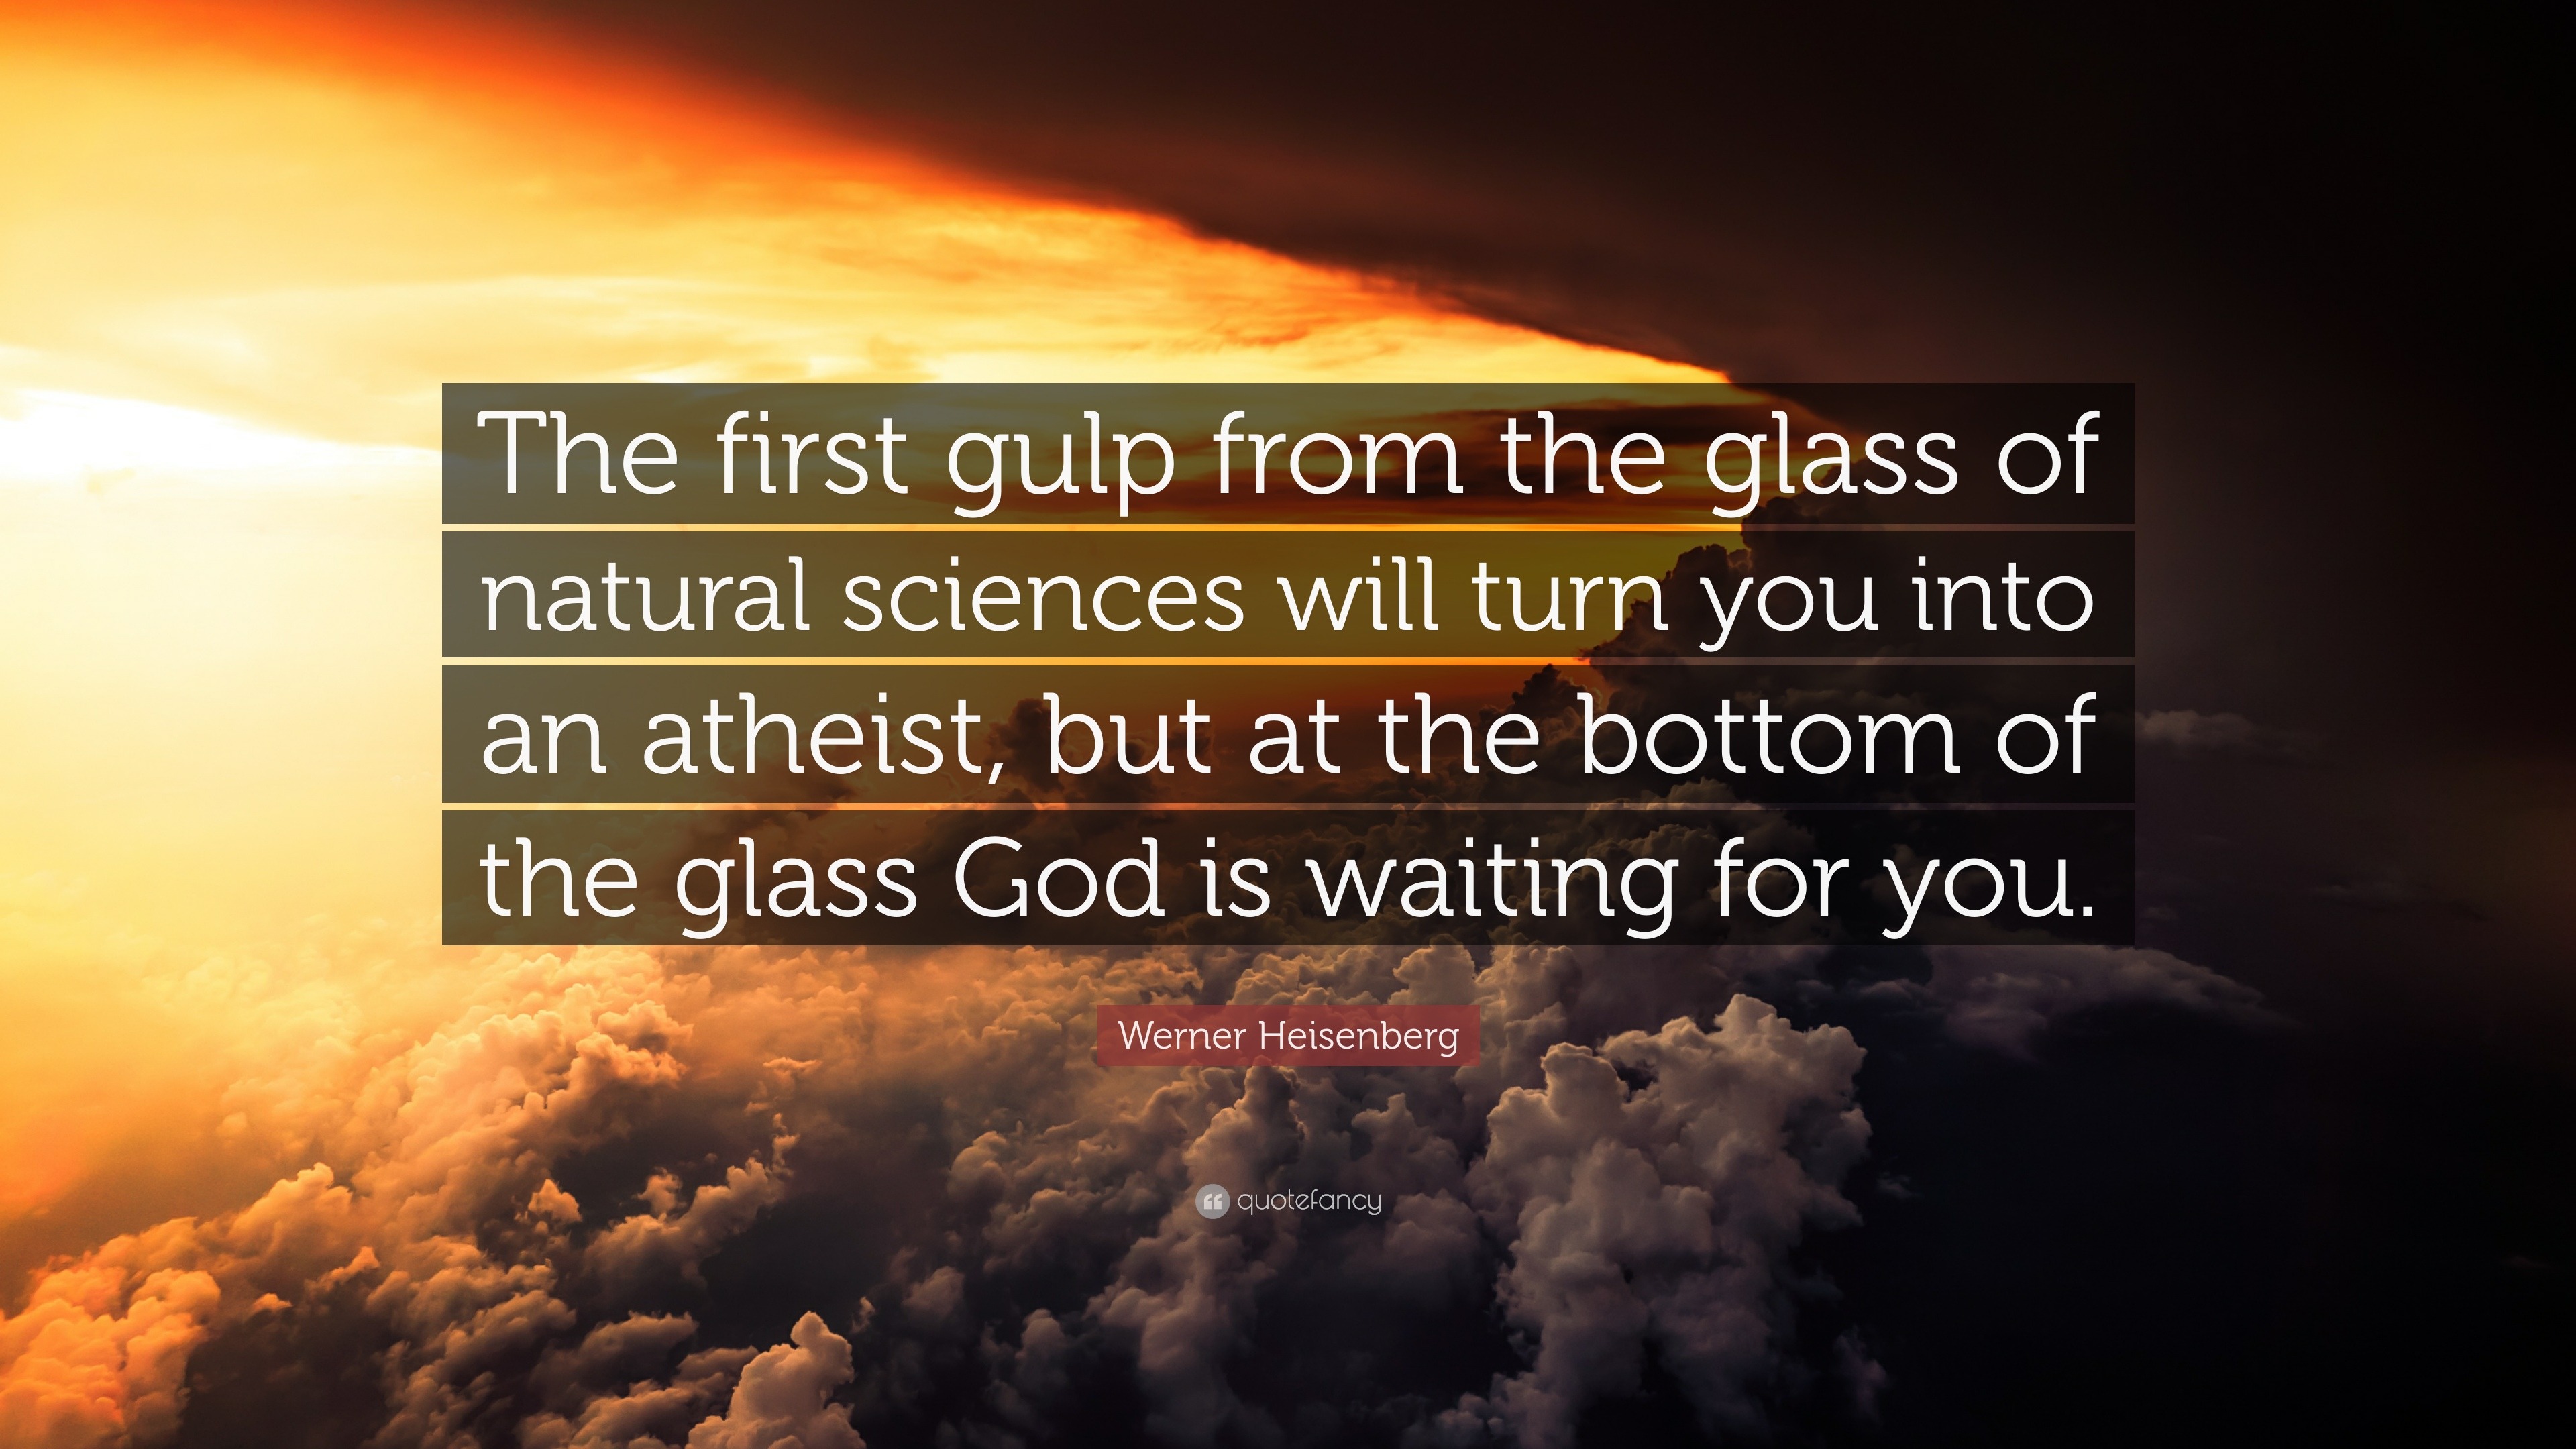 Werner Heisenberg Quote “The first gulp from the glass of natural